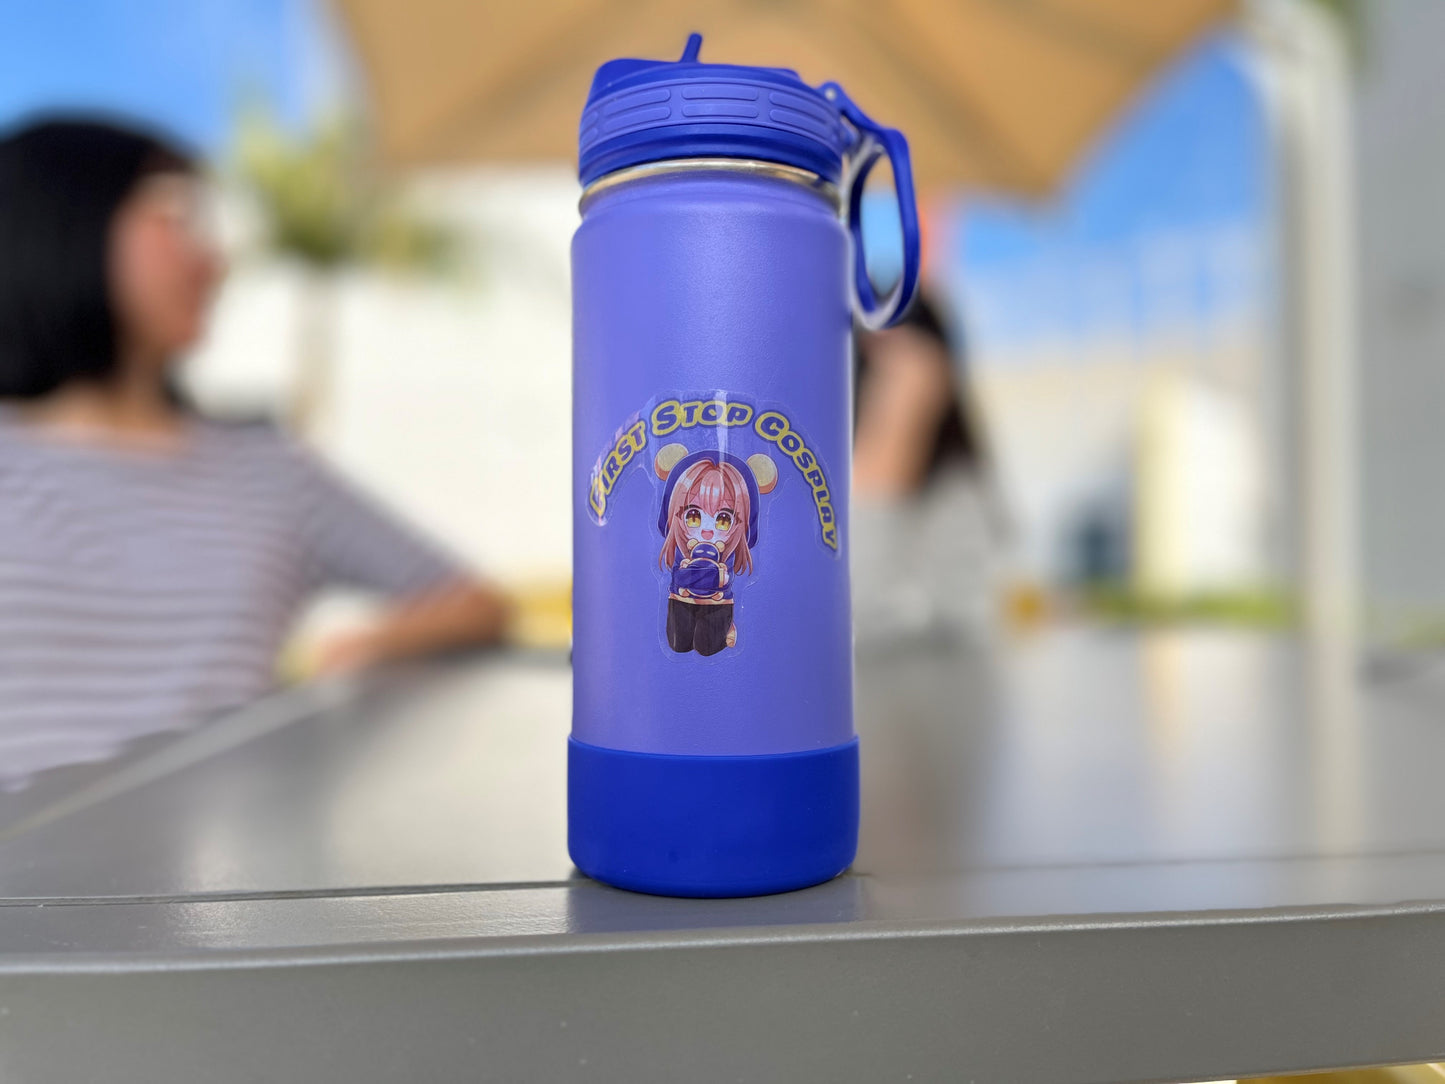 A "Pan" sticker on a purple water thermos with two people chatting in the background.